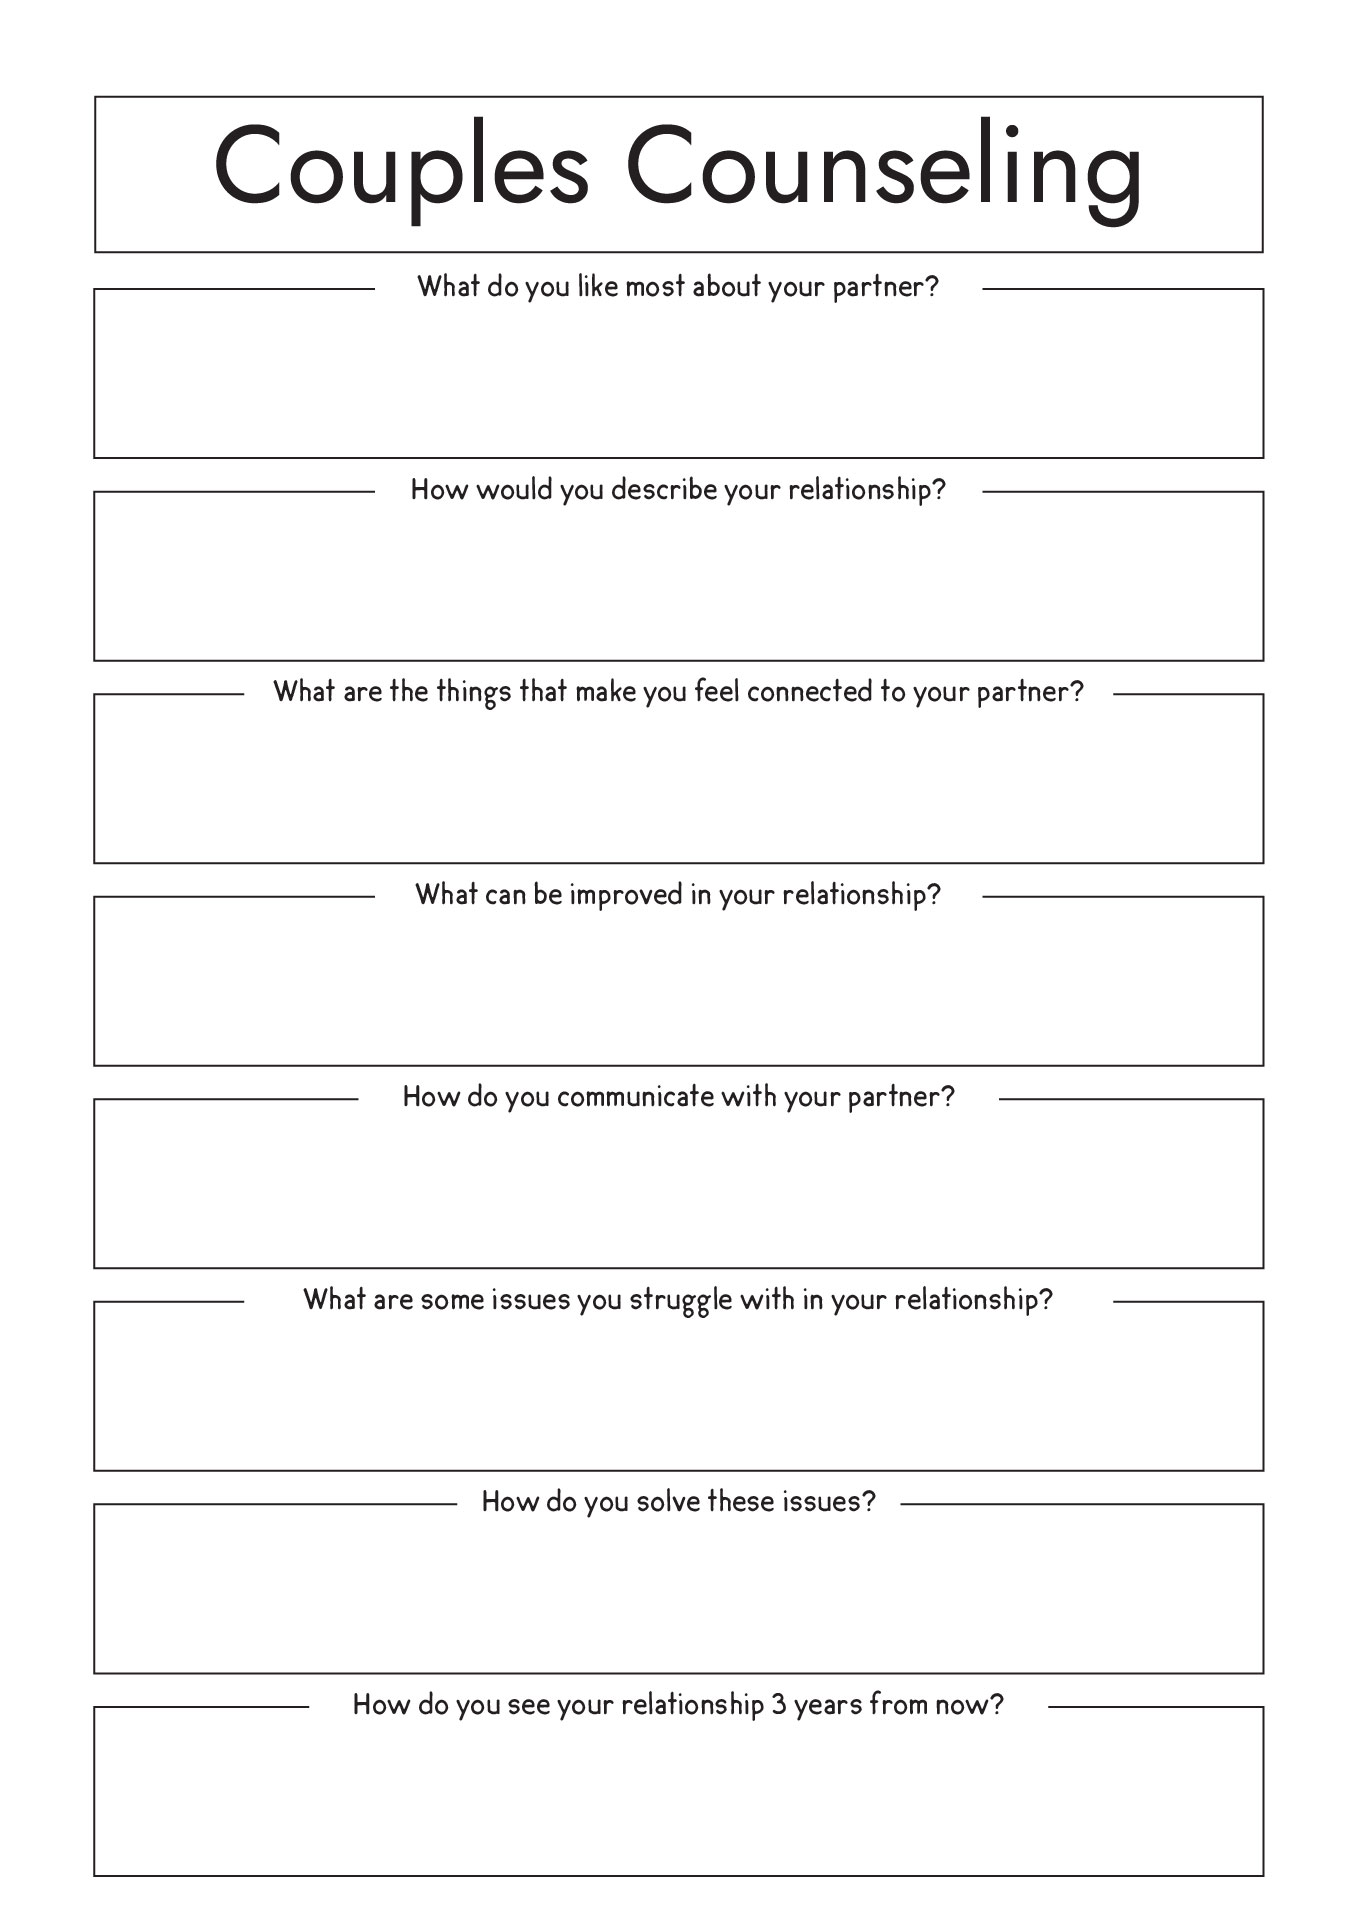 13 Best Images of Rational Emotive Therapy Worksheet ...